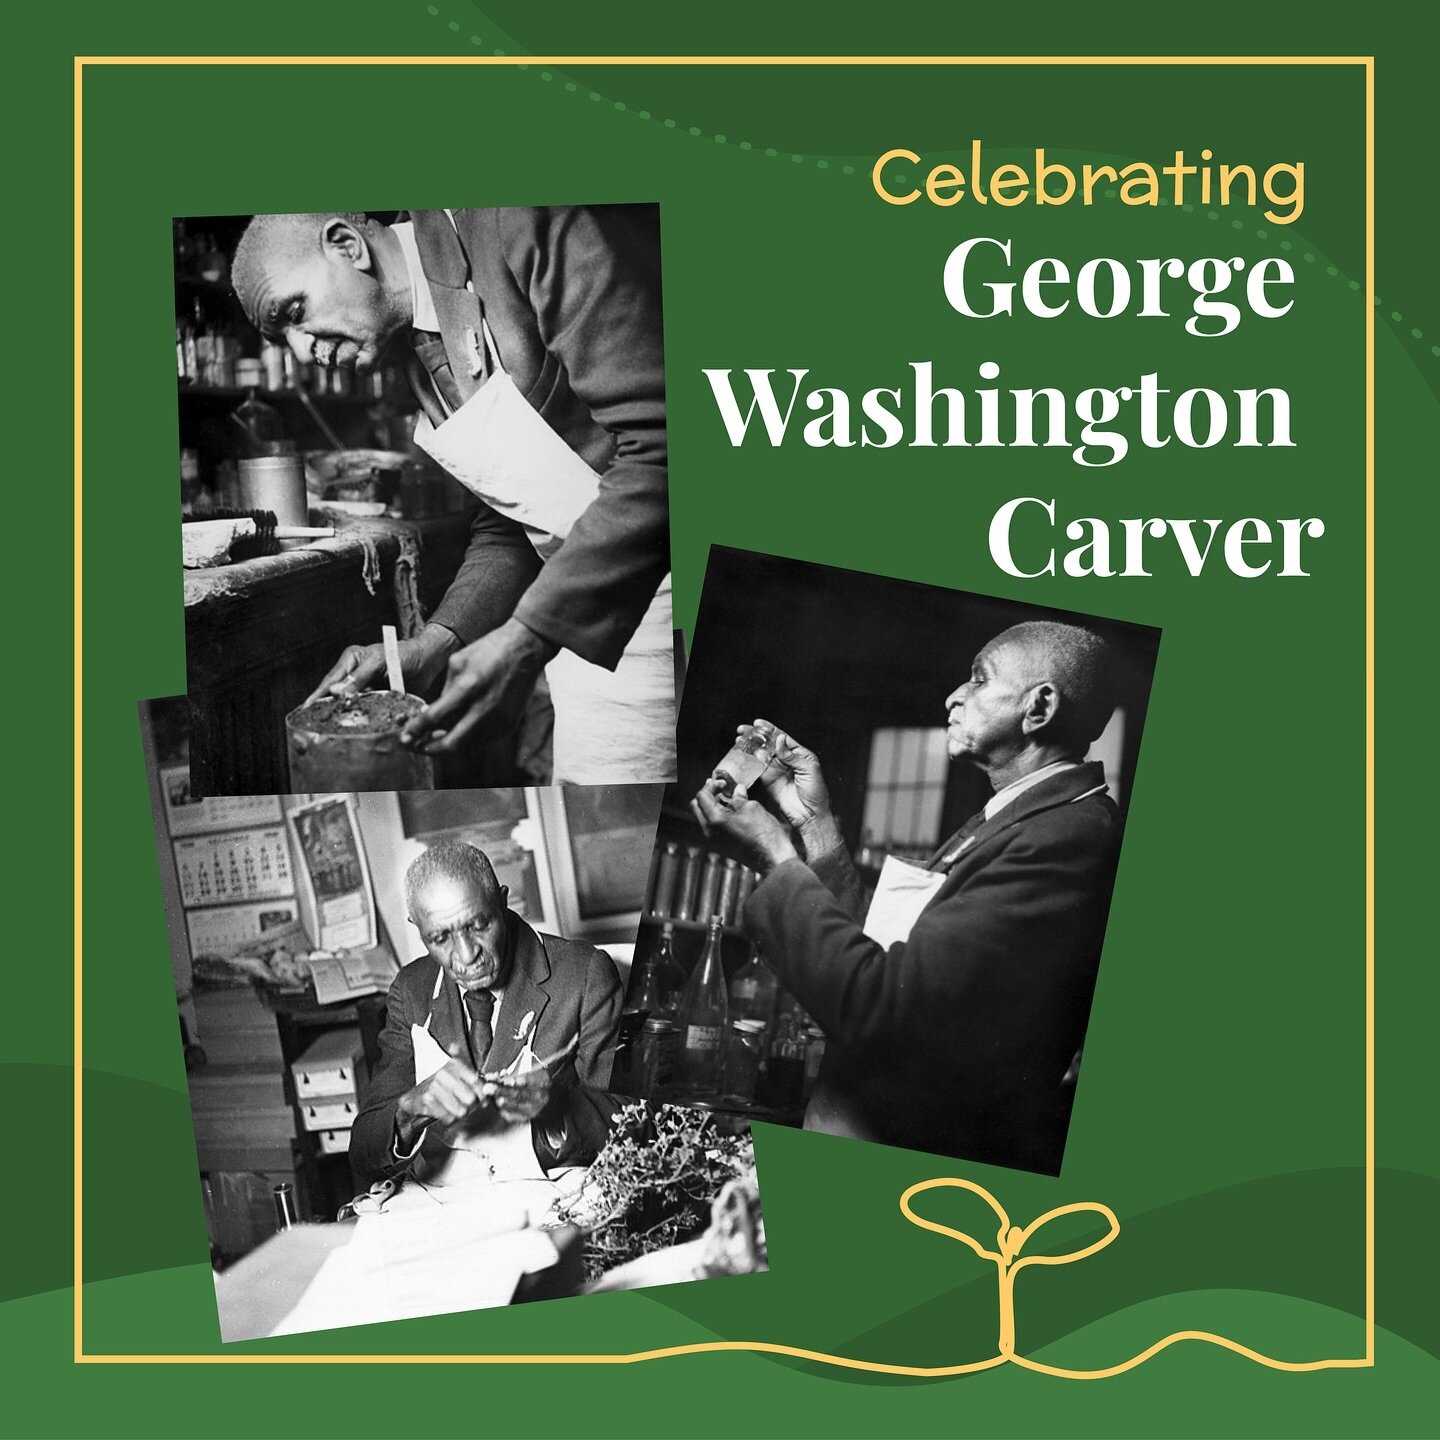 This Black History Month, we at Boston Youth Farm Project are proud to celebrate George Washington Carver. 

As a young boy, upon the abolishment of slavery, George earned the nickname &ldquo;the plant doctor&rdquo; for his green thumb and ability to